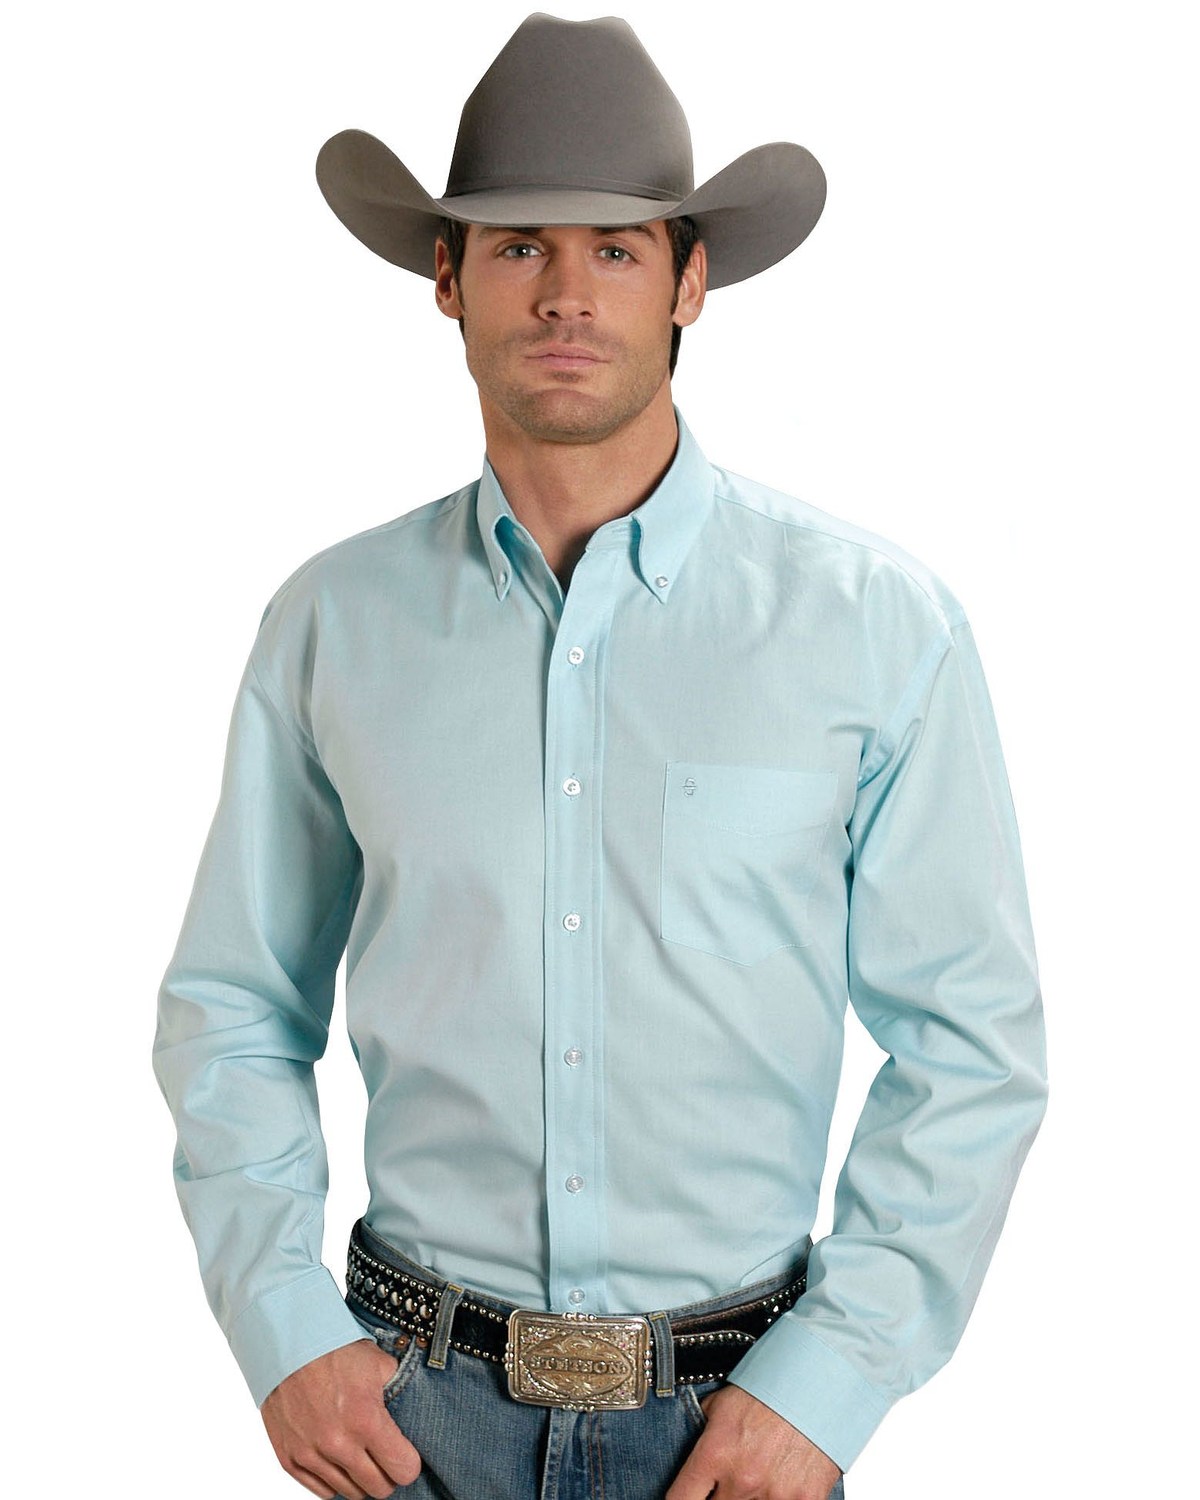 Stetson Men's Solid Button Oxford Long Sleeve Western Shirt